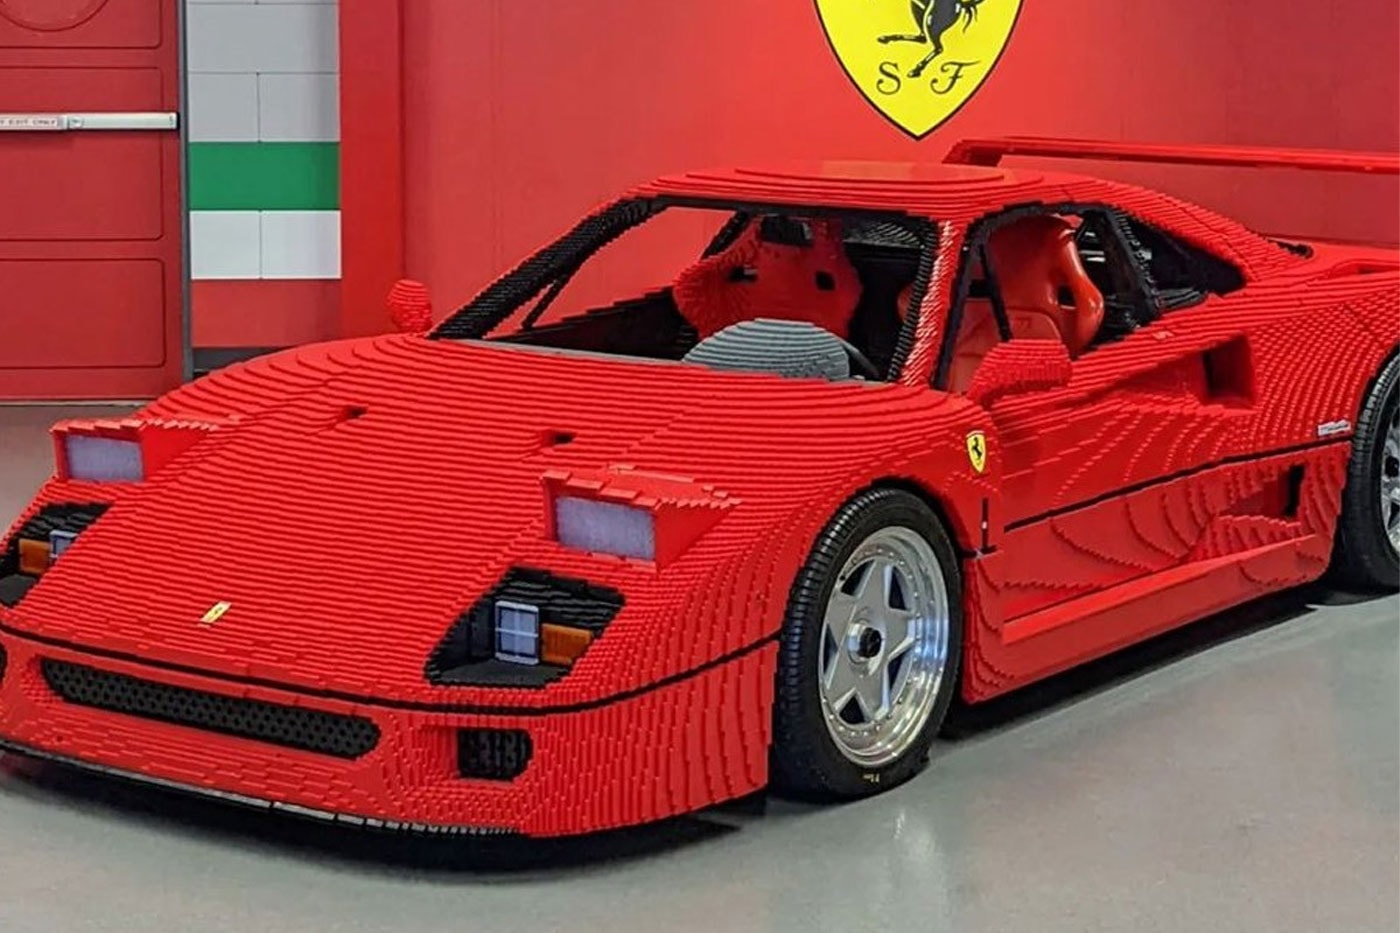 LEGO Ferrari f40 brick model 1 of 1 size legendary supercar toy version larry chen 3700 hours connected to real steering wheel  legoland campus california 